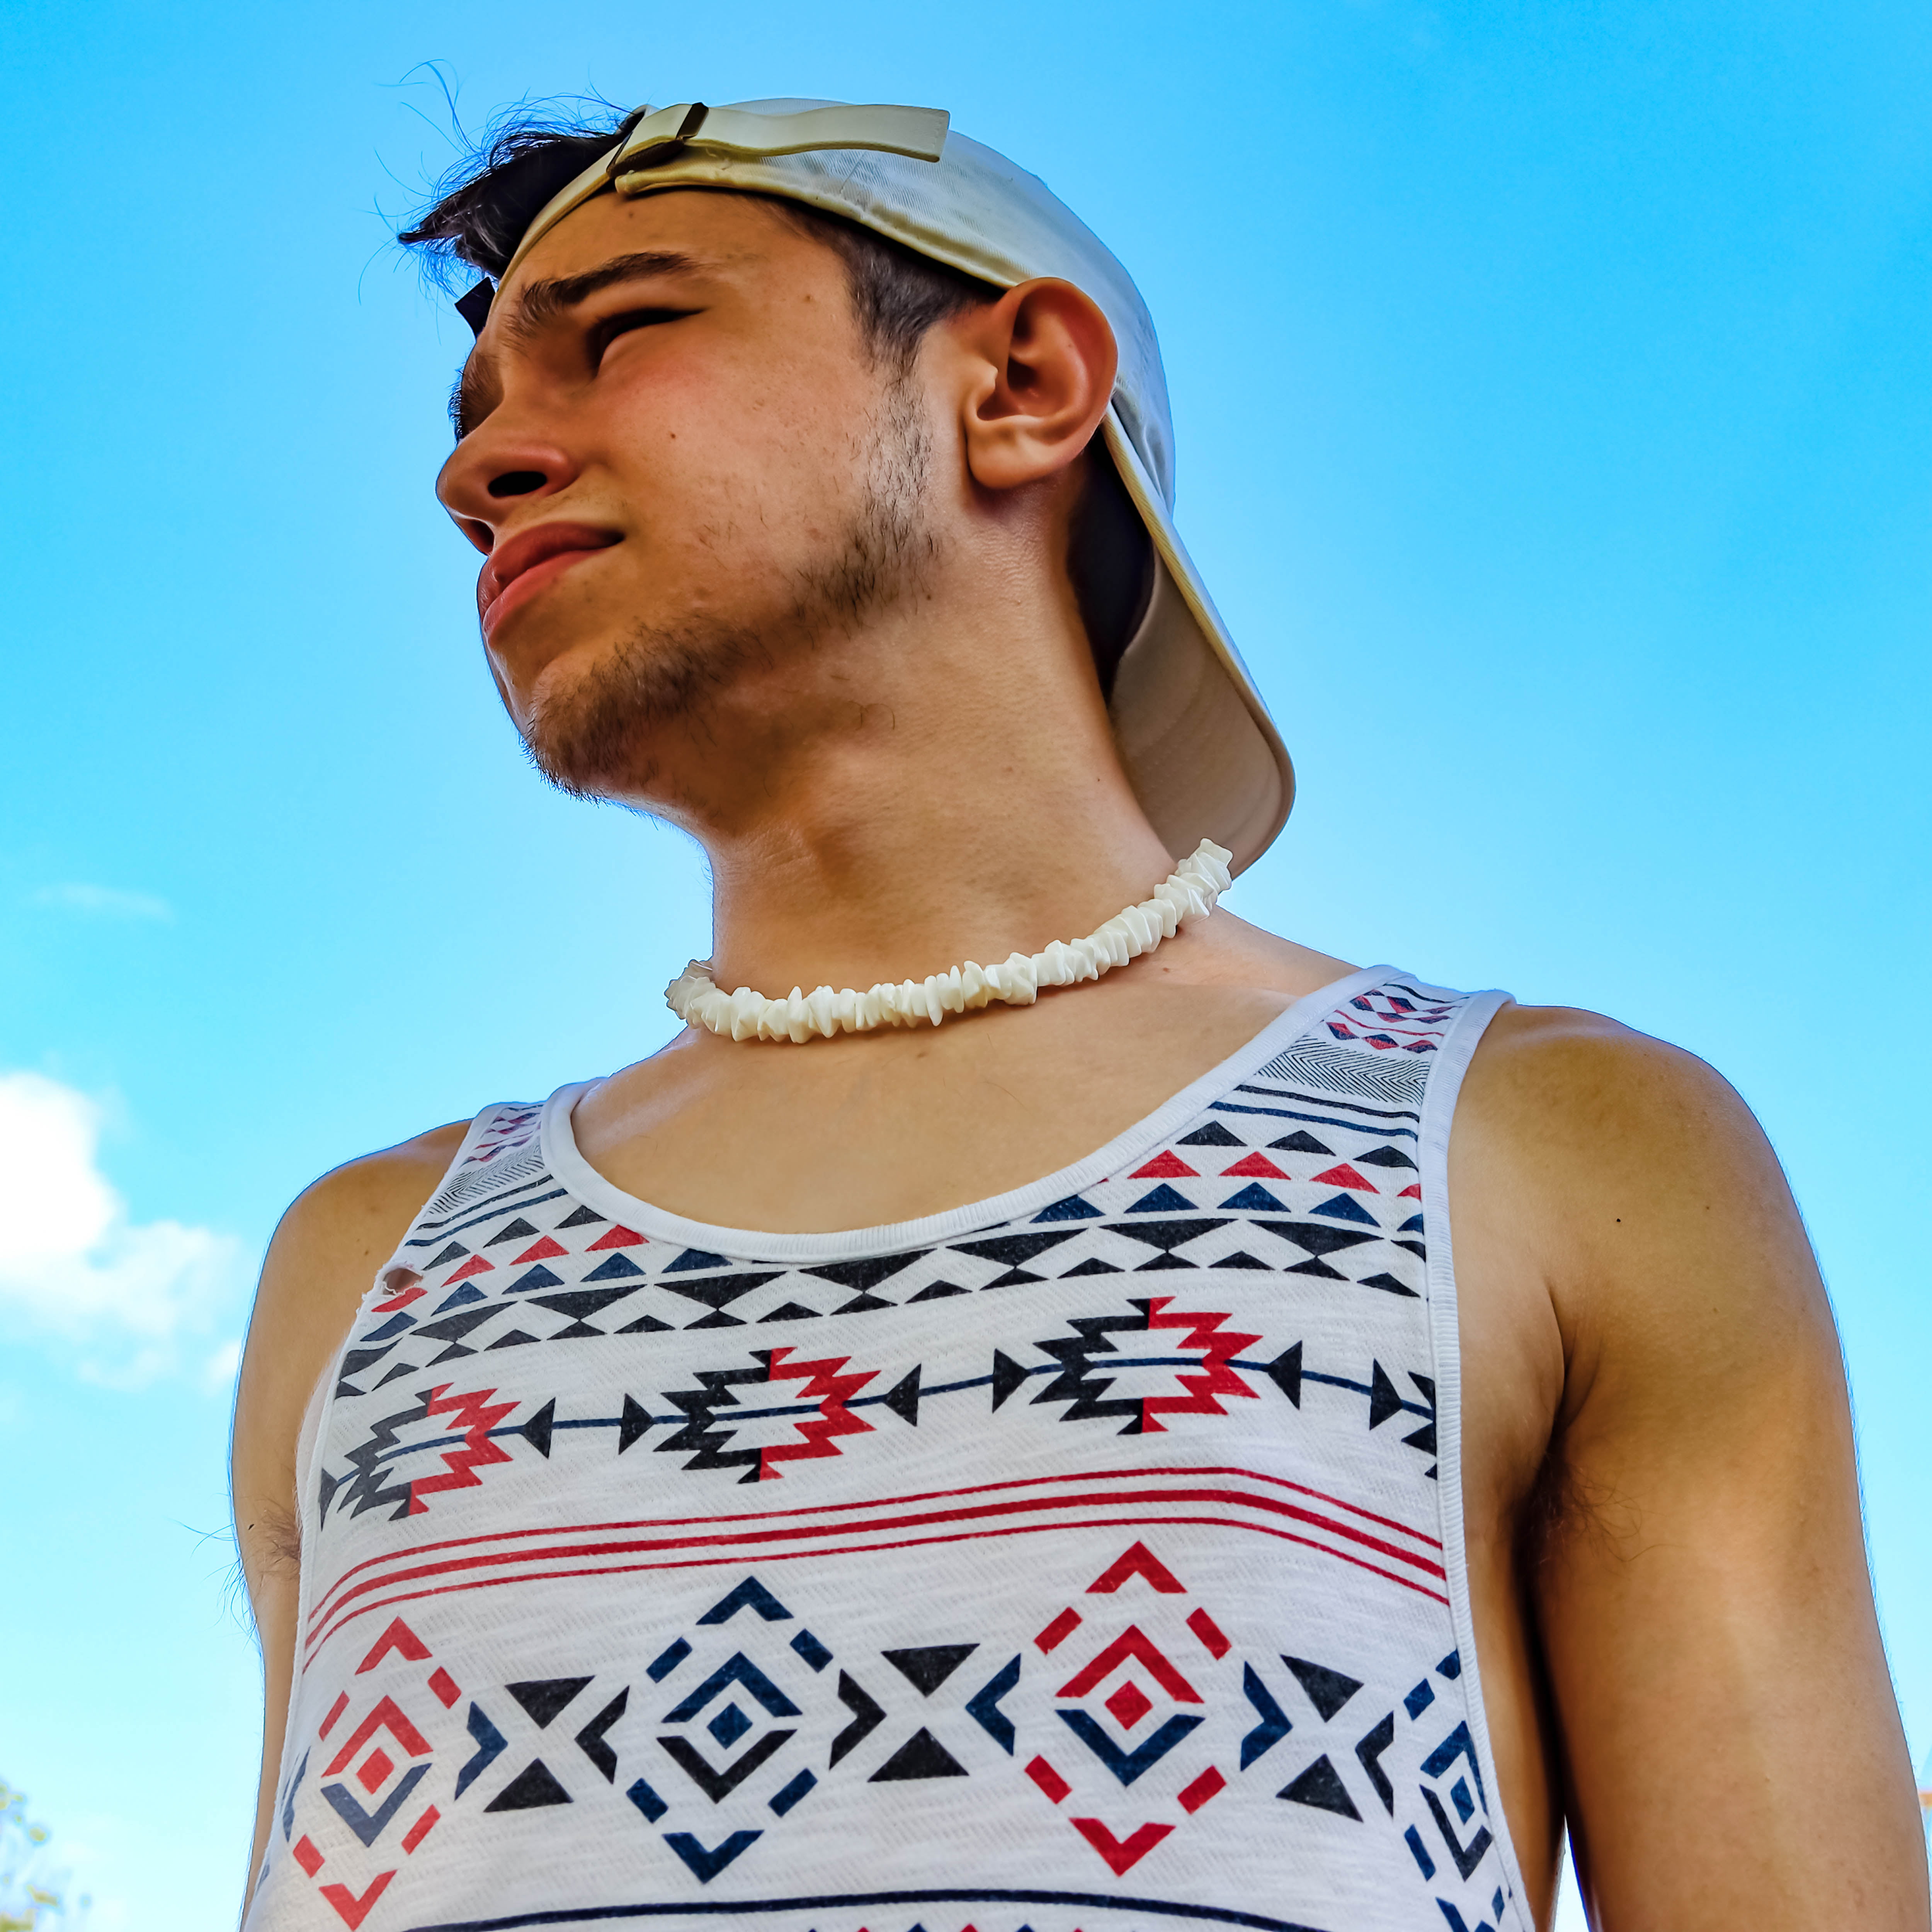 Puka Shell Necklace for Men: How It Became a Symbol of Cool